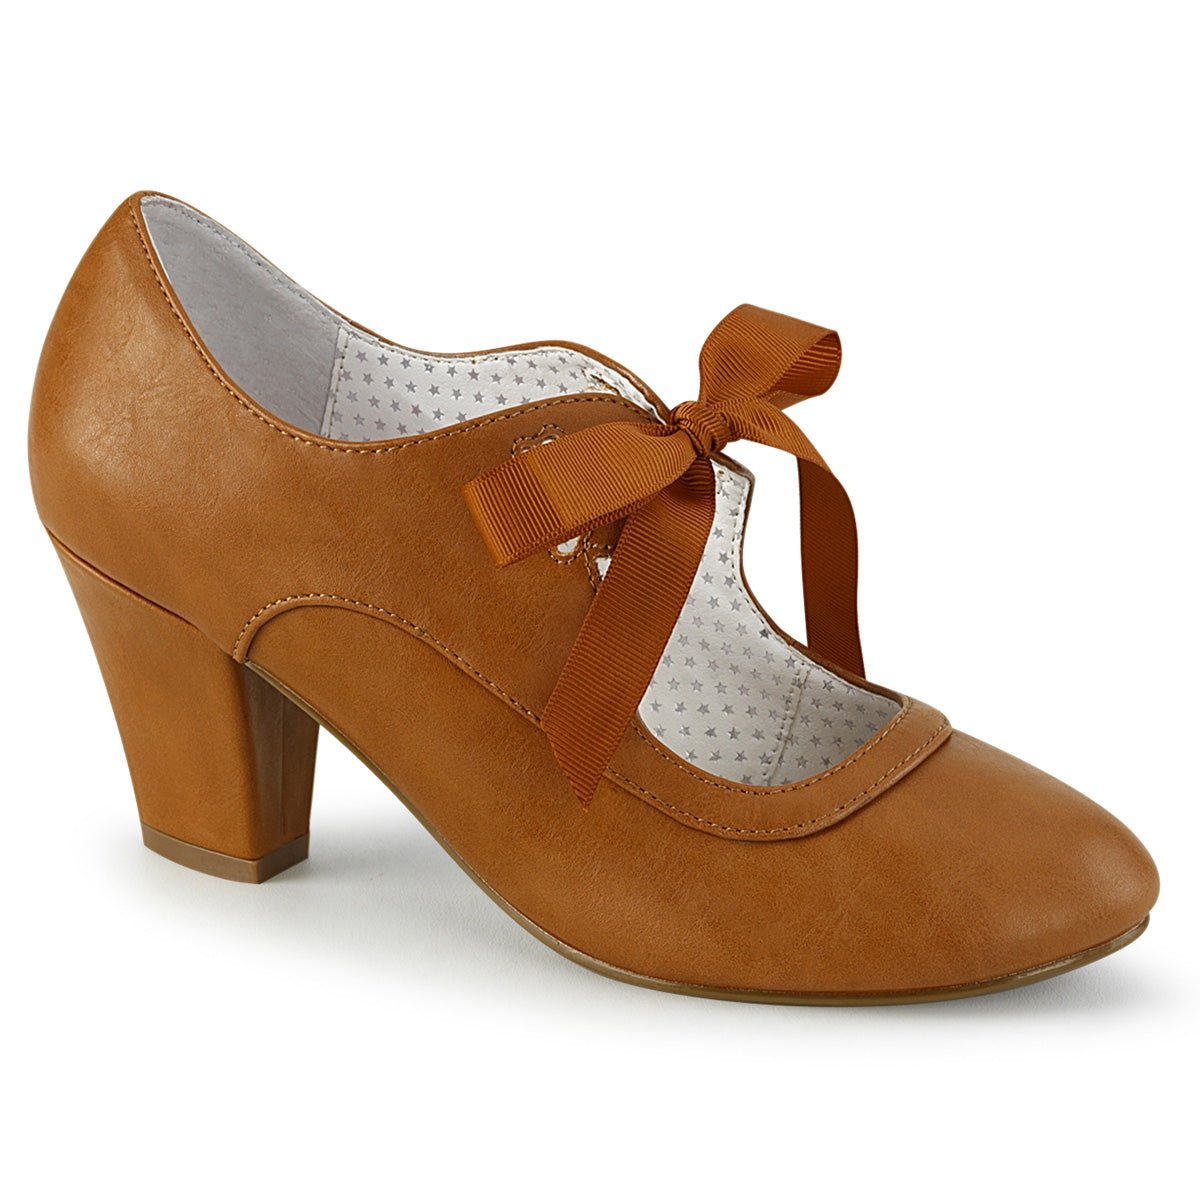 Clearance Pin-Up Couture Wiggle 32 Camel Size 5UK/8USA - From Clearance Sold By Alternative Footwear